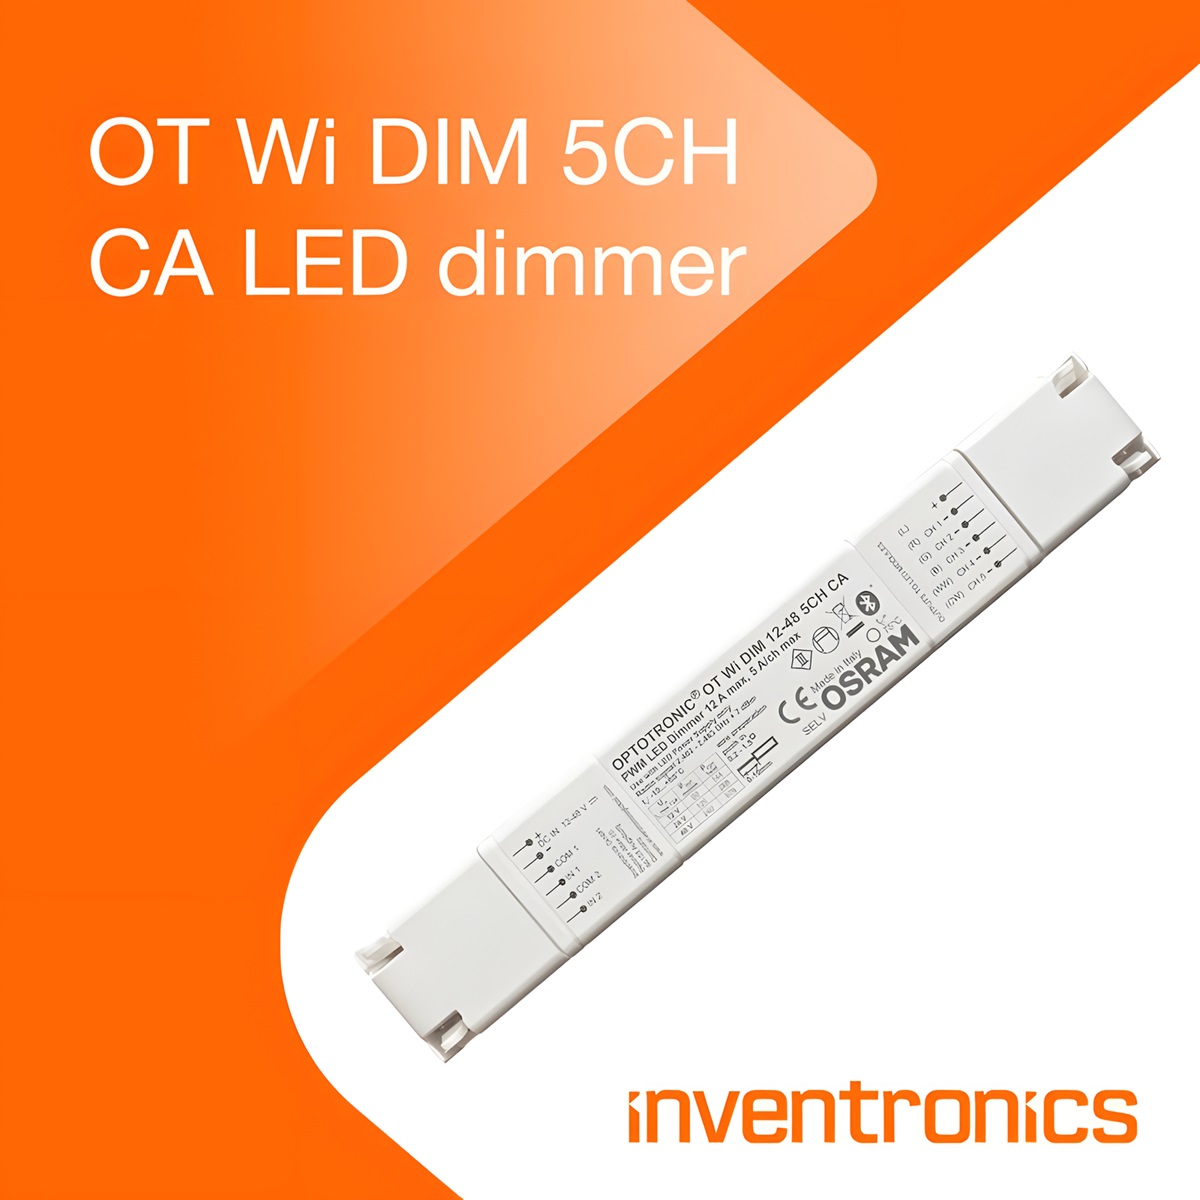 Inventronics Introduces the Latest OPTOTRONIC LED Dimmer for Residential Environments